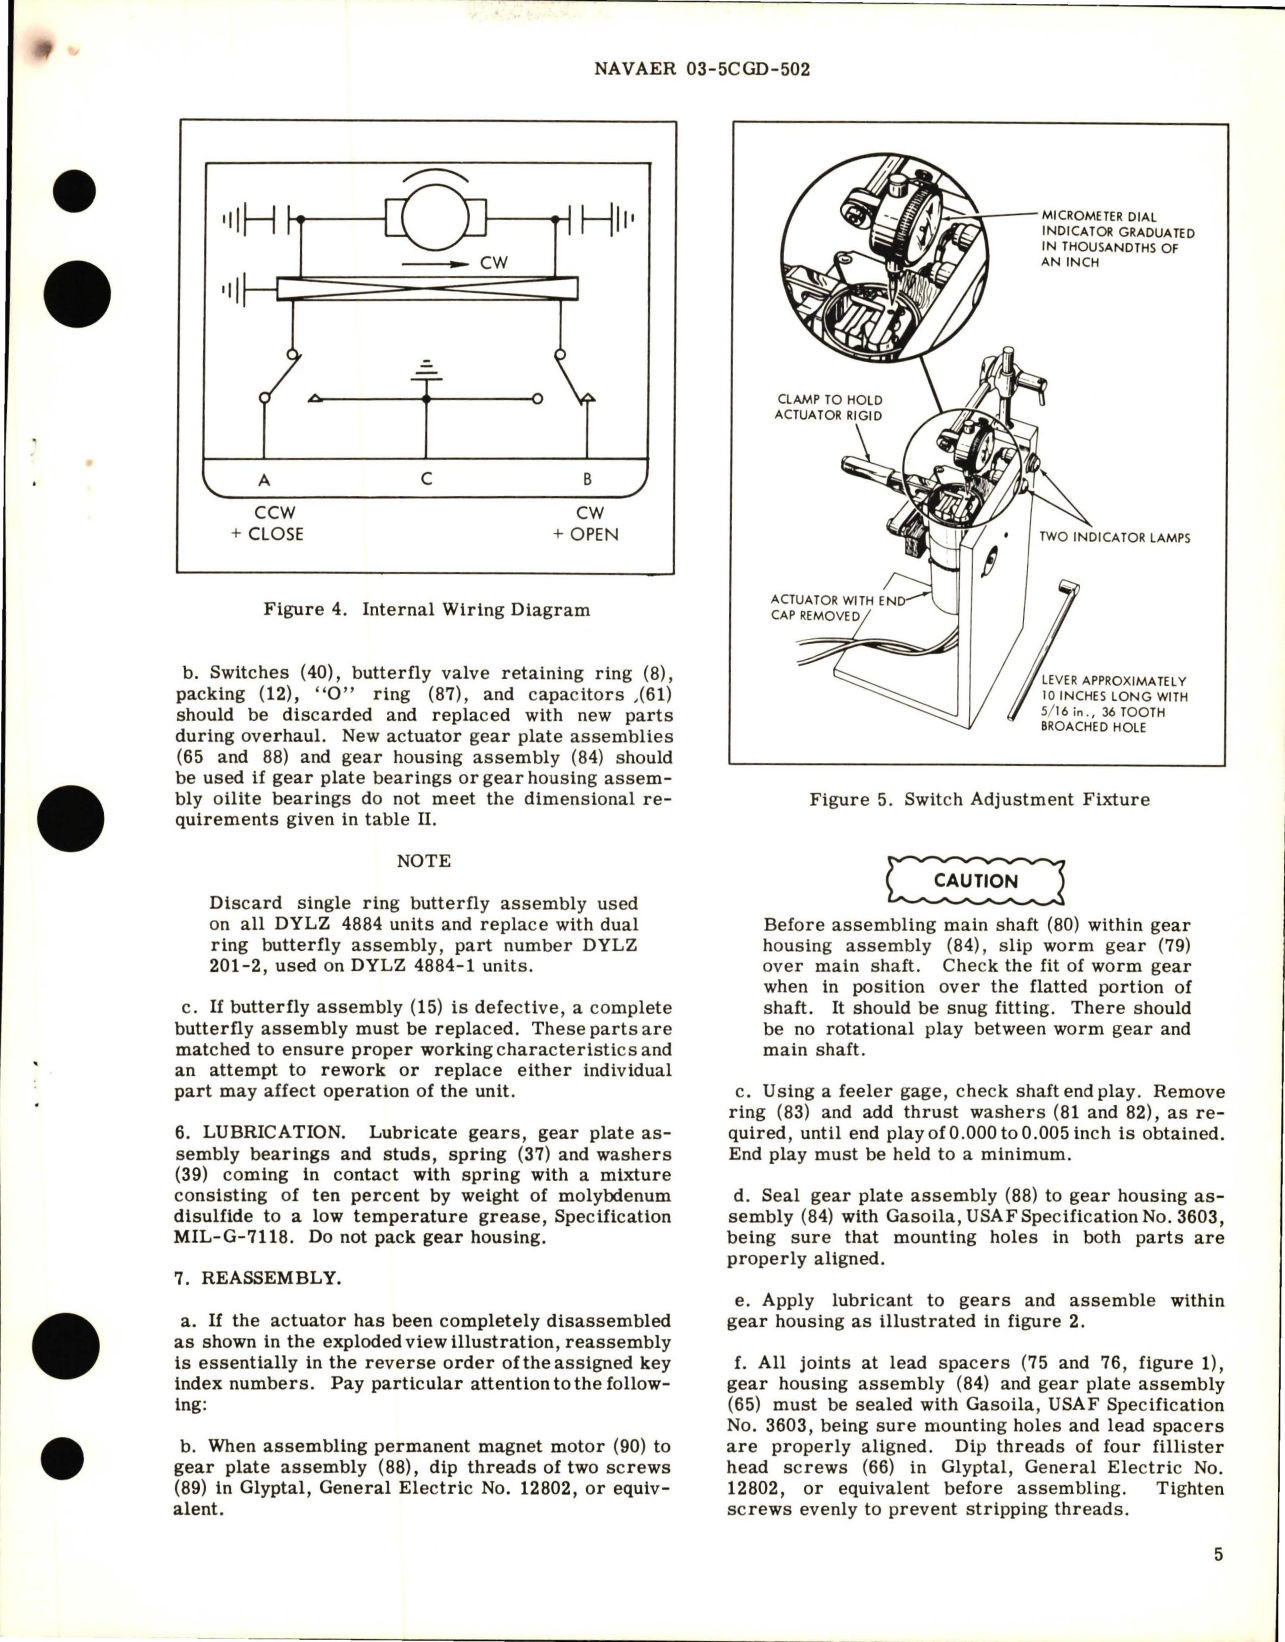 Sample page 5 from AirCorps Library document: Overhaul Instructions with Parts Breakdown for Valve and Actuator Assembly - DYLZ 4884 and DYLZ 4884-1 